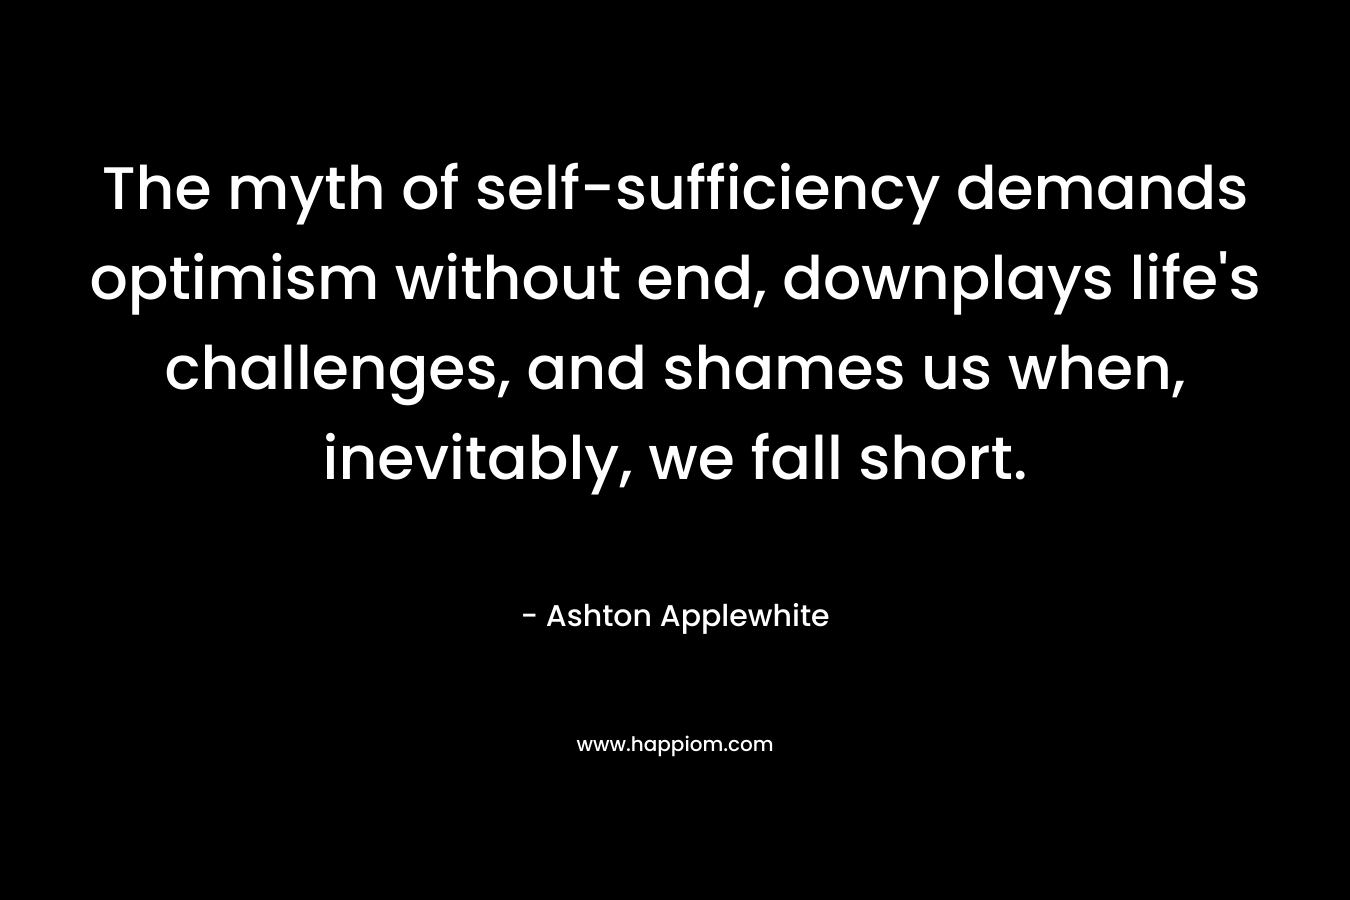 The myth of self-sufficiency demands optimism without end, downplays life’s challenges, and shames us when, inevitably, we fall short. – Ashton Applewhite